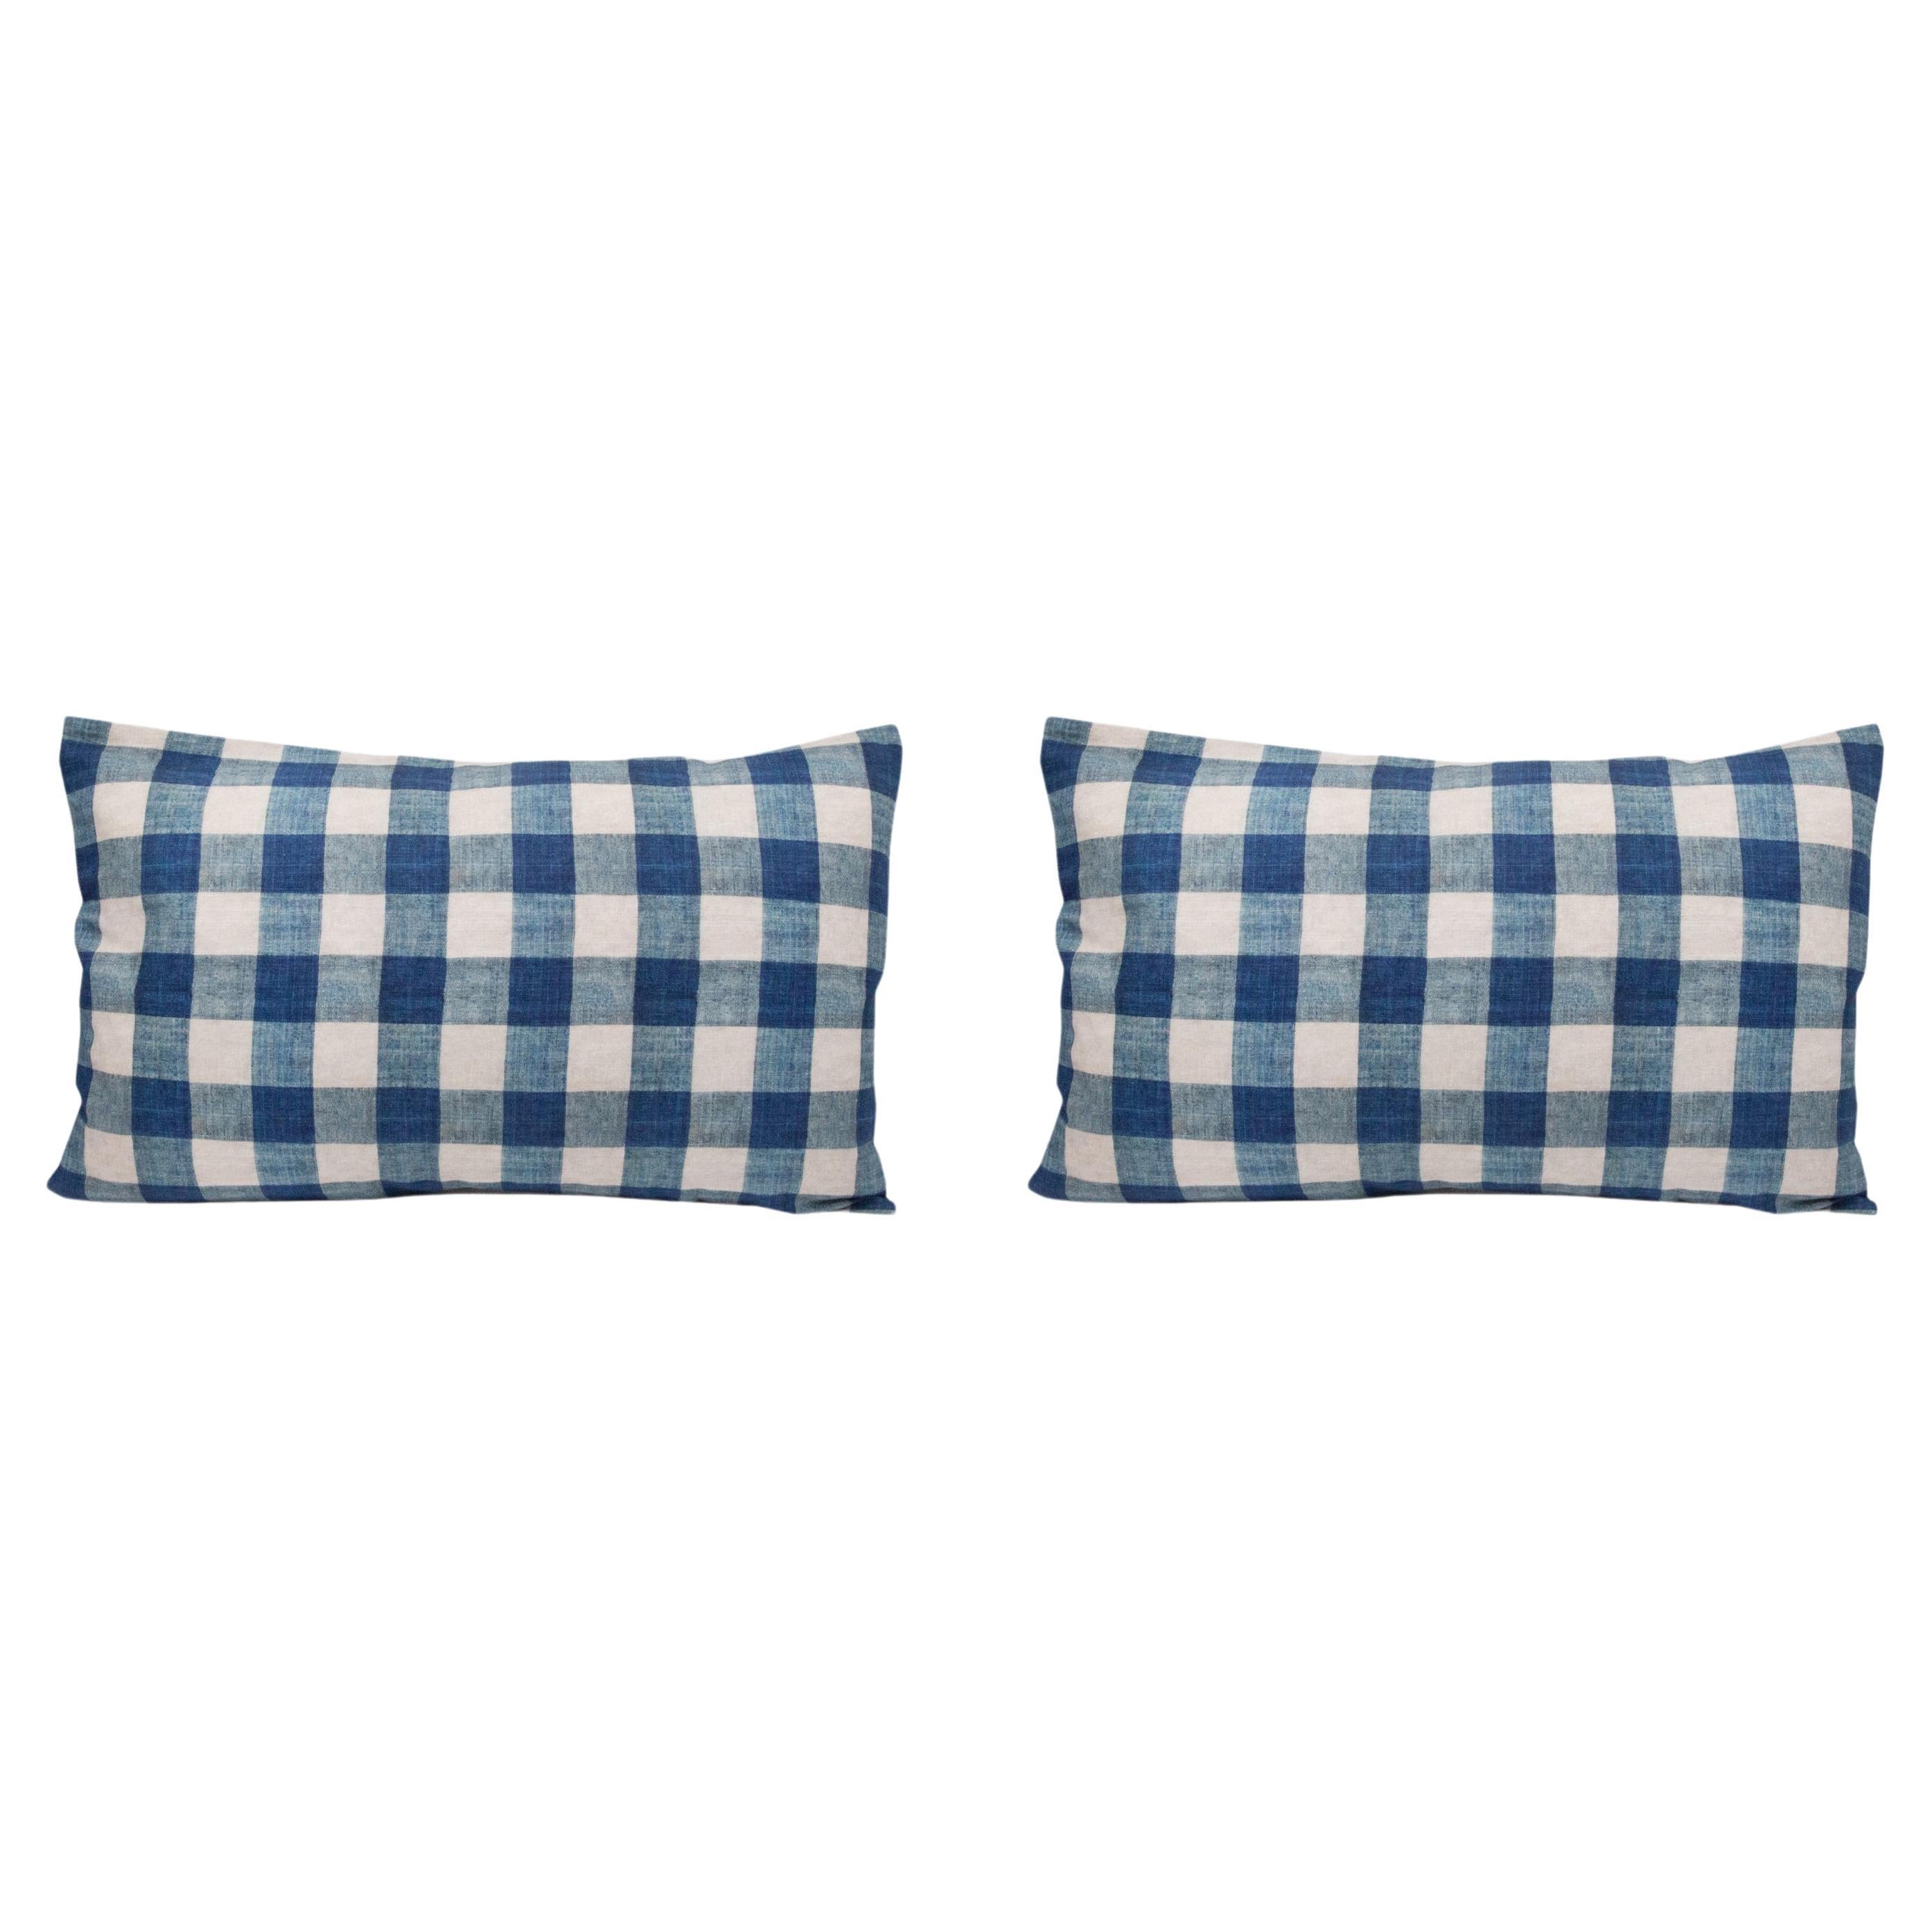 Pair of Large Linen Pillow Cushions - Carreaux Indigo pattern - Made in Paris For Sale